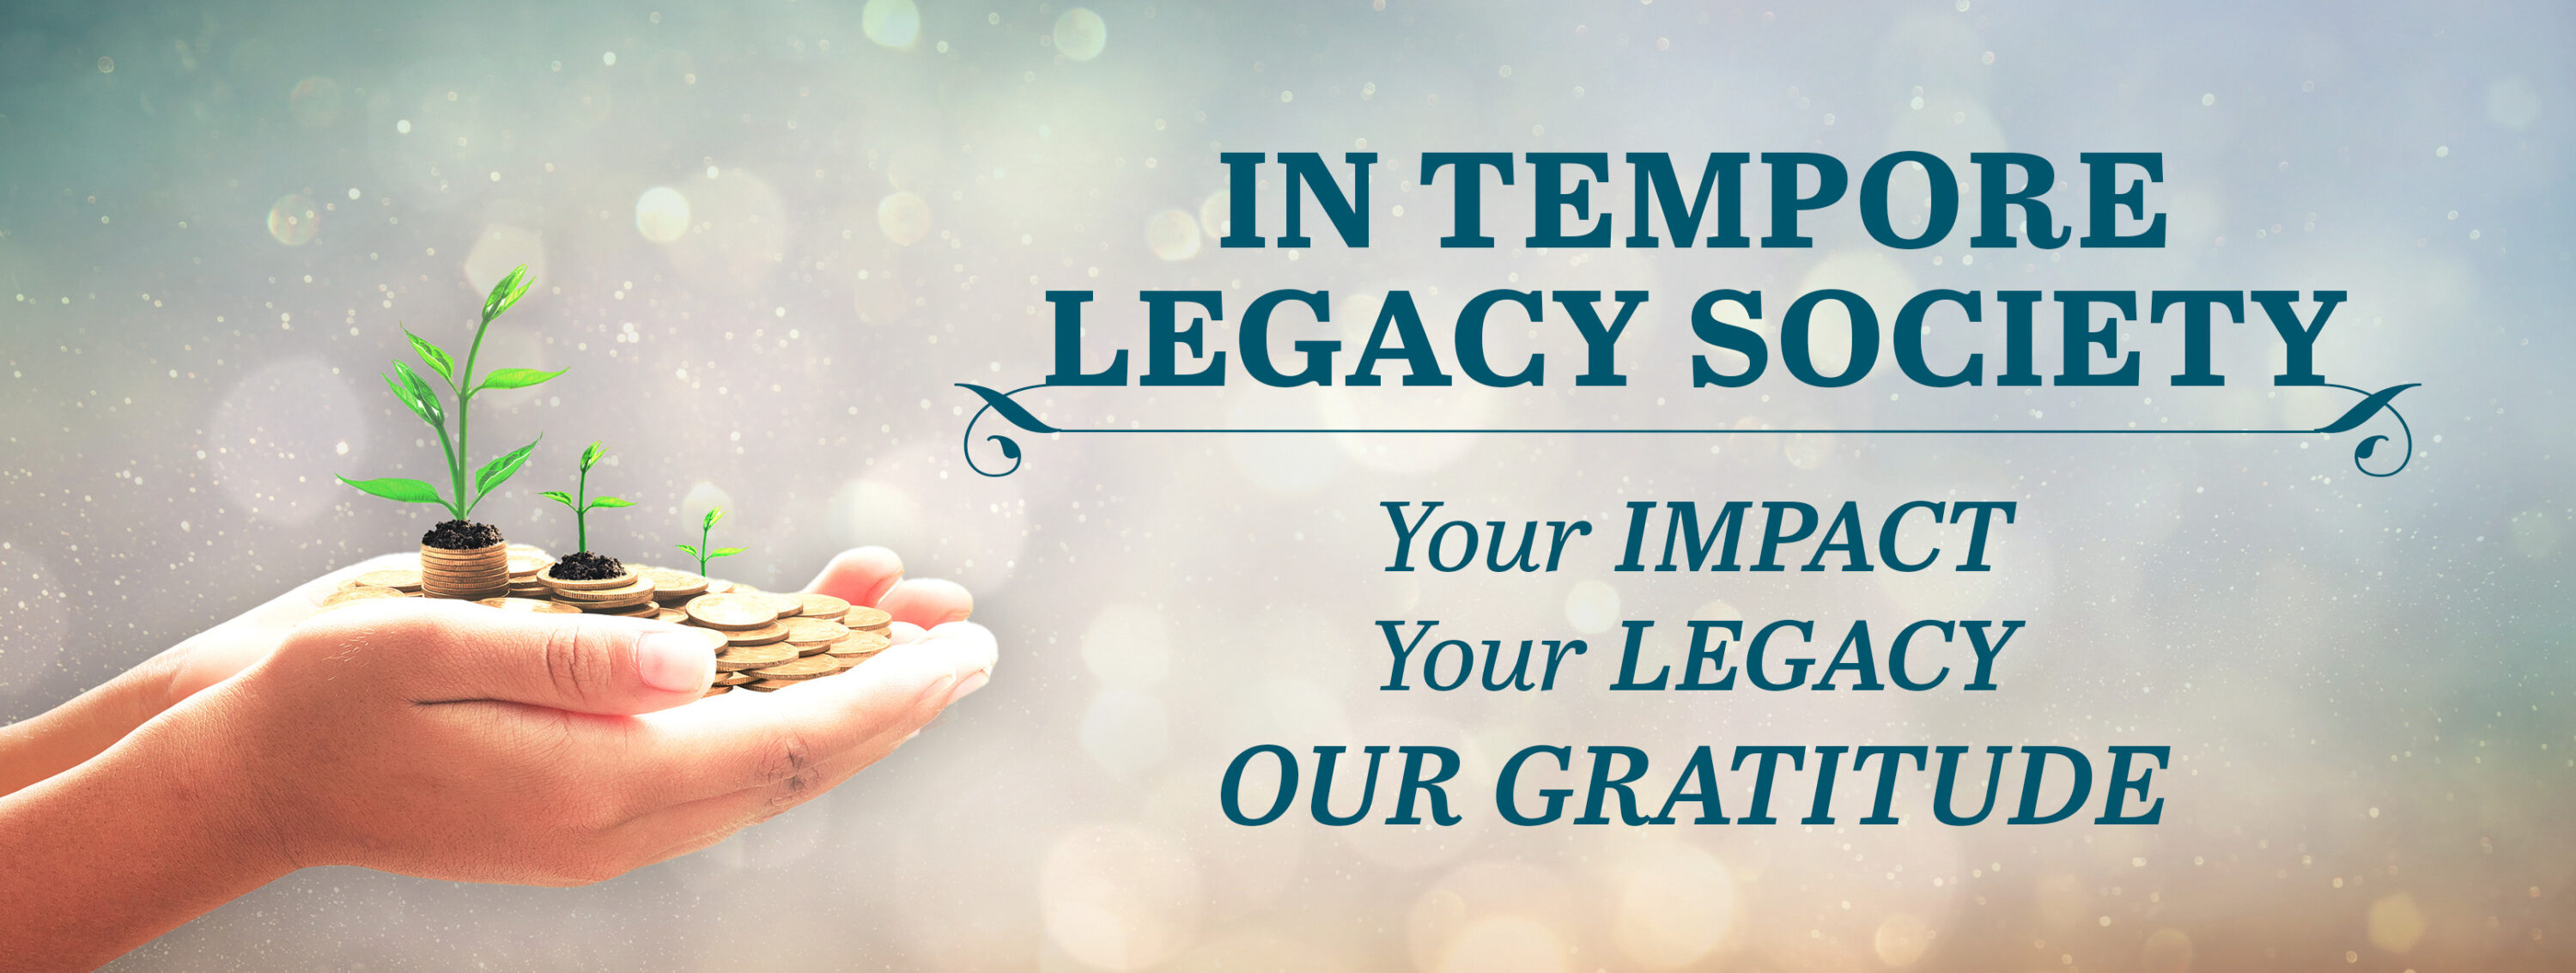 In Tempore Legacy Society page banner